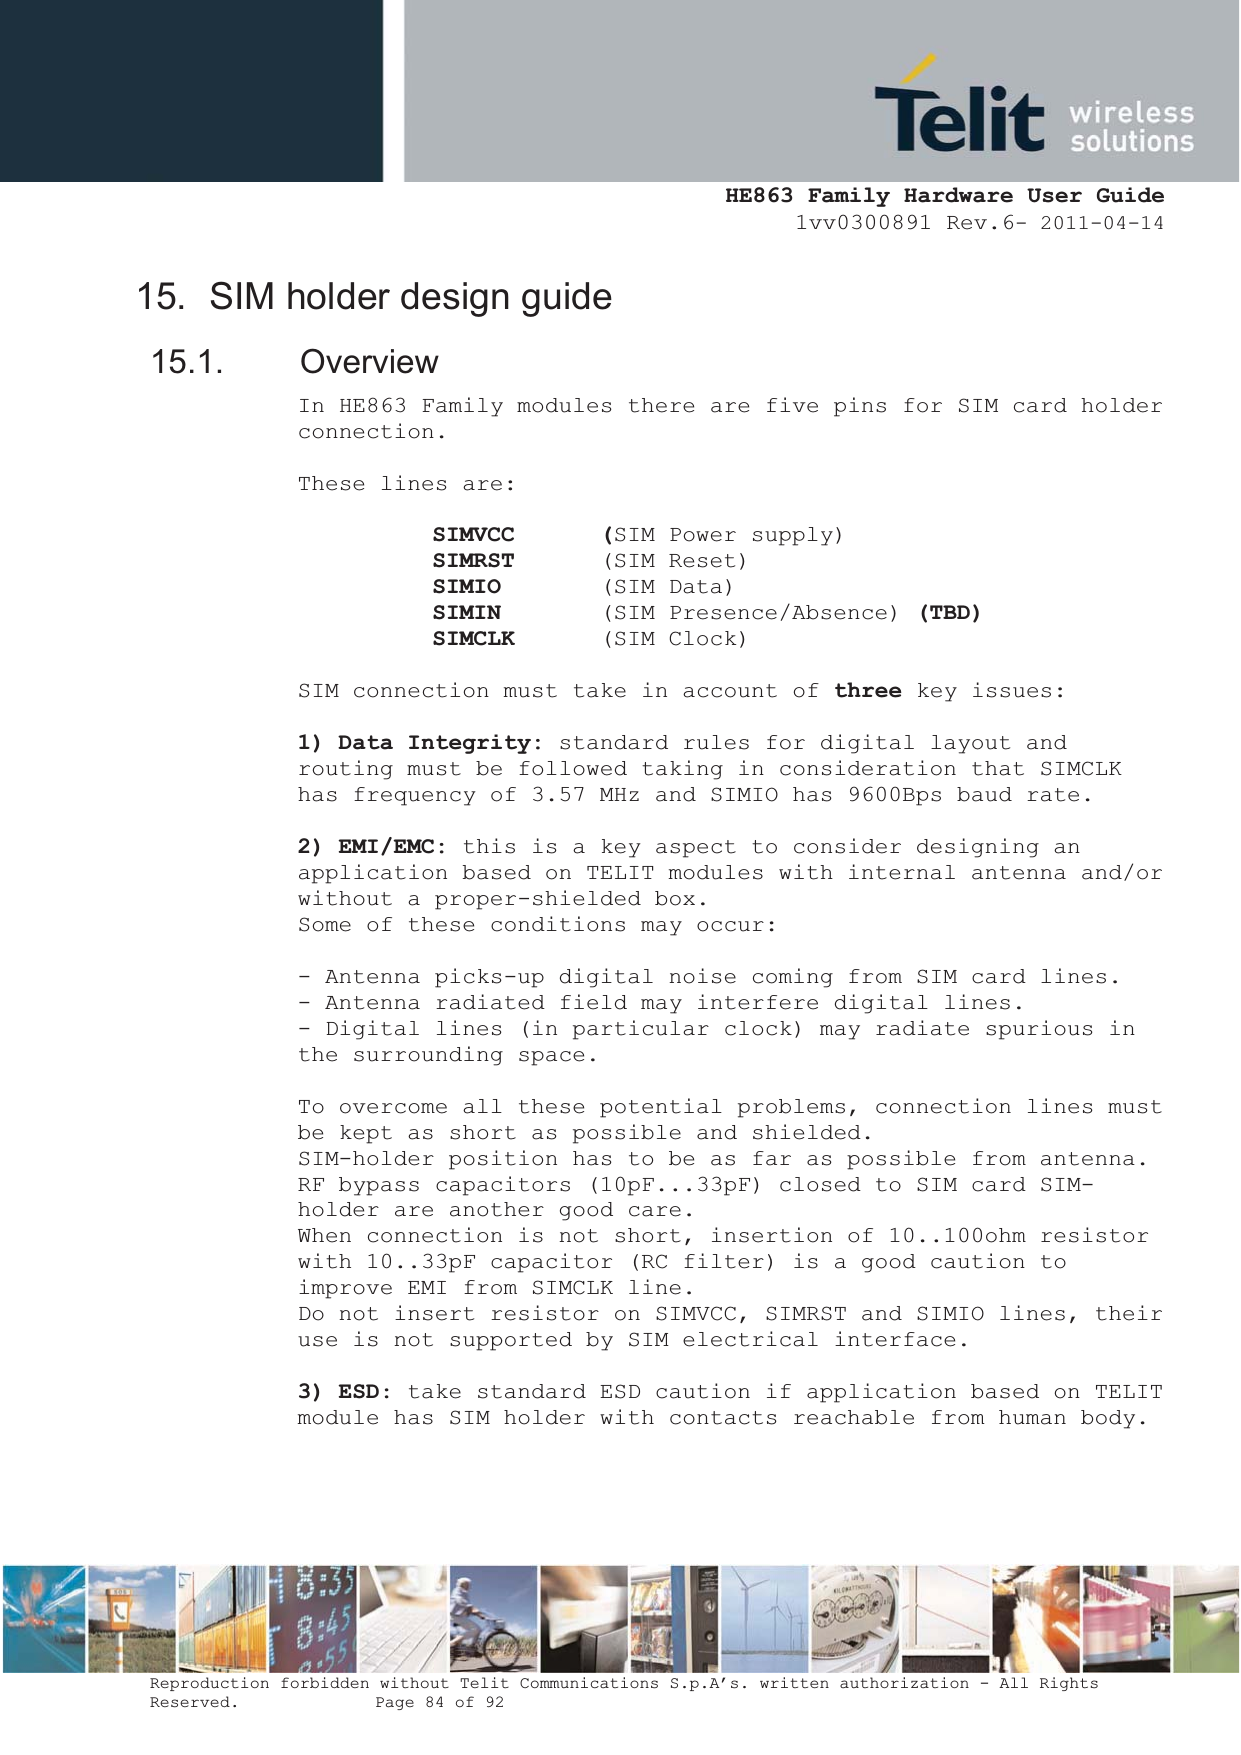  HE863 Family Hardware User Guide 1vv0300891 Rev.6- 2011-04-14    Reproduction forbidden without Telit Communications S.p.A’s. written authorization - All Rights Reserved.    Page 84 of 92  15.  SIM holder design guide 15.1. Overview In HE863 Family modules there are five pins for SIM card holder connection.  These lines are: SIMVCC   (SIM Power supply) SIMRST (SIM Reset) SIMIO (SIM Data) SIMIN (SIM Presence/Absence) (TBD)SIMCLK (SIM Clock)  SIM connection must take in account of three key issues:  1) Data Integrity: standard rules for digital layout and routing must be followed taking in consideration that SIMCLK has frequency of 3.57 MHz and SIMIO has 9600Bps baud rate.  2) EMI/EMC: this is a key aspect to consider designing an application based on TELIT modules with internal antenna and/or without a proper-shielded box. Some of these conditions may occur:  - Antenna picks-up digital noise coming from SIM card lines. - Antenna radiated field may interfere digital lines. - Digital lines (in particular clock) may radiate spurious in the surrounding space.  To overcome all these potential problems, connection lines must be kept as short as possible and shielded. SIM-holder position has to be as far as possible from antenna. RF bypass capacitors (10pF...33pF) closed to SIM card SIM-holder are another good care. When connection is not short, insertion of 10..100ohm resistor with 10..33pF capacitor (RC filter) is a good caution to improve EMI from SIMCLK line. Do not insert resistor on SIMVCC, SIMRST and SIMIO lines, their use is not supported by SIM electrical interface.  3) ESD: take standard ESD caution if application based on TELIT module has SIM holder with contacts reachable from human body.   